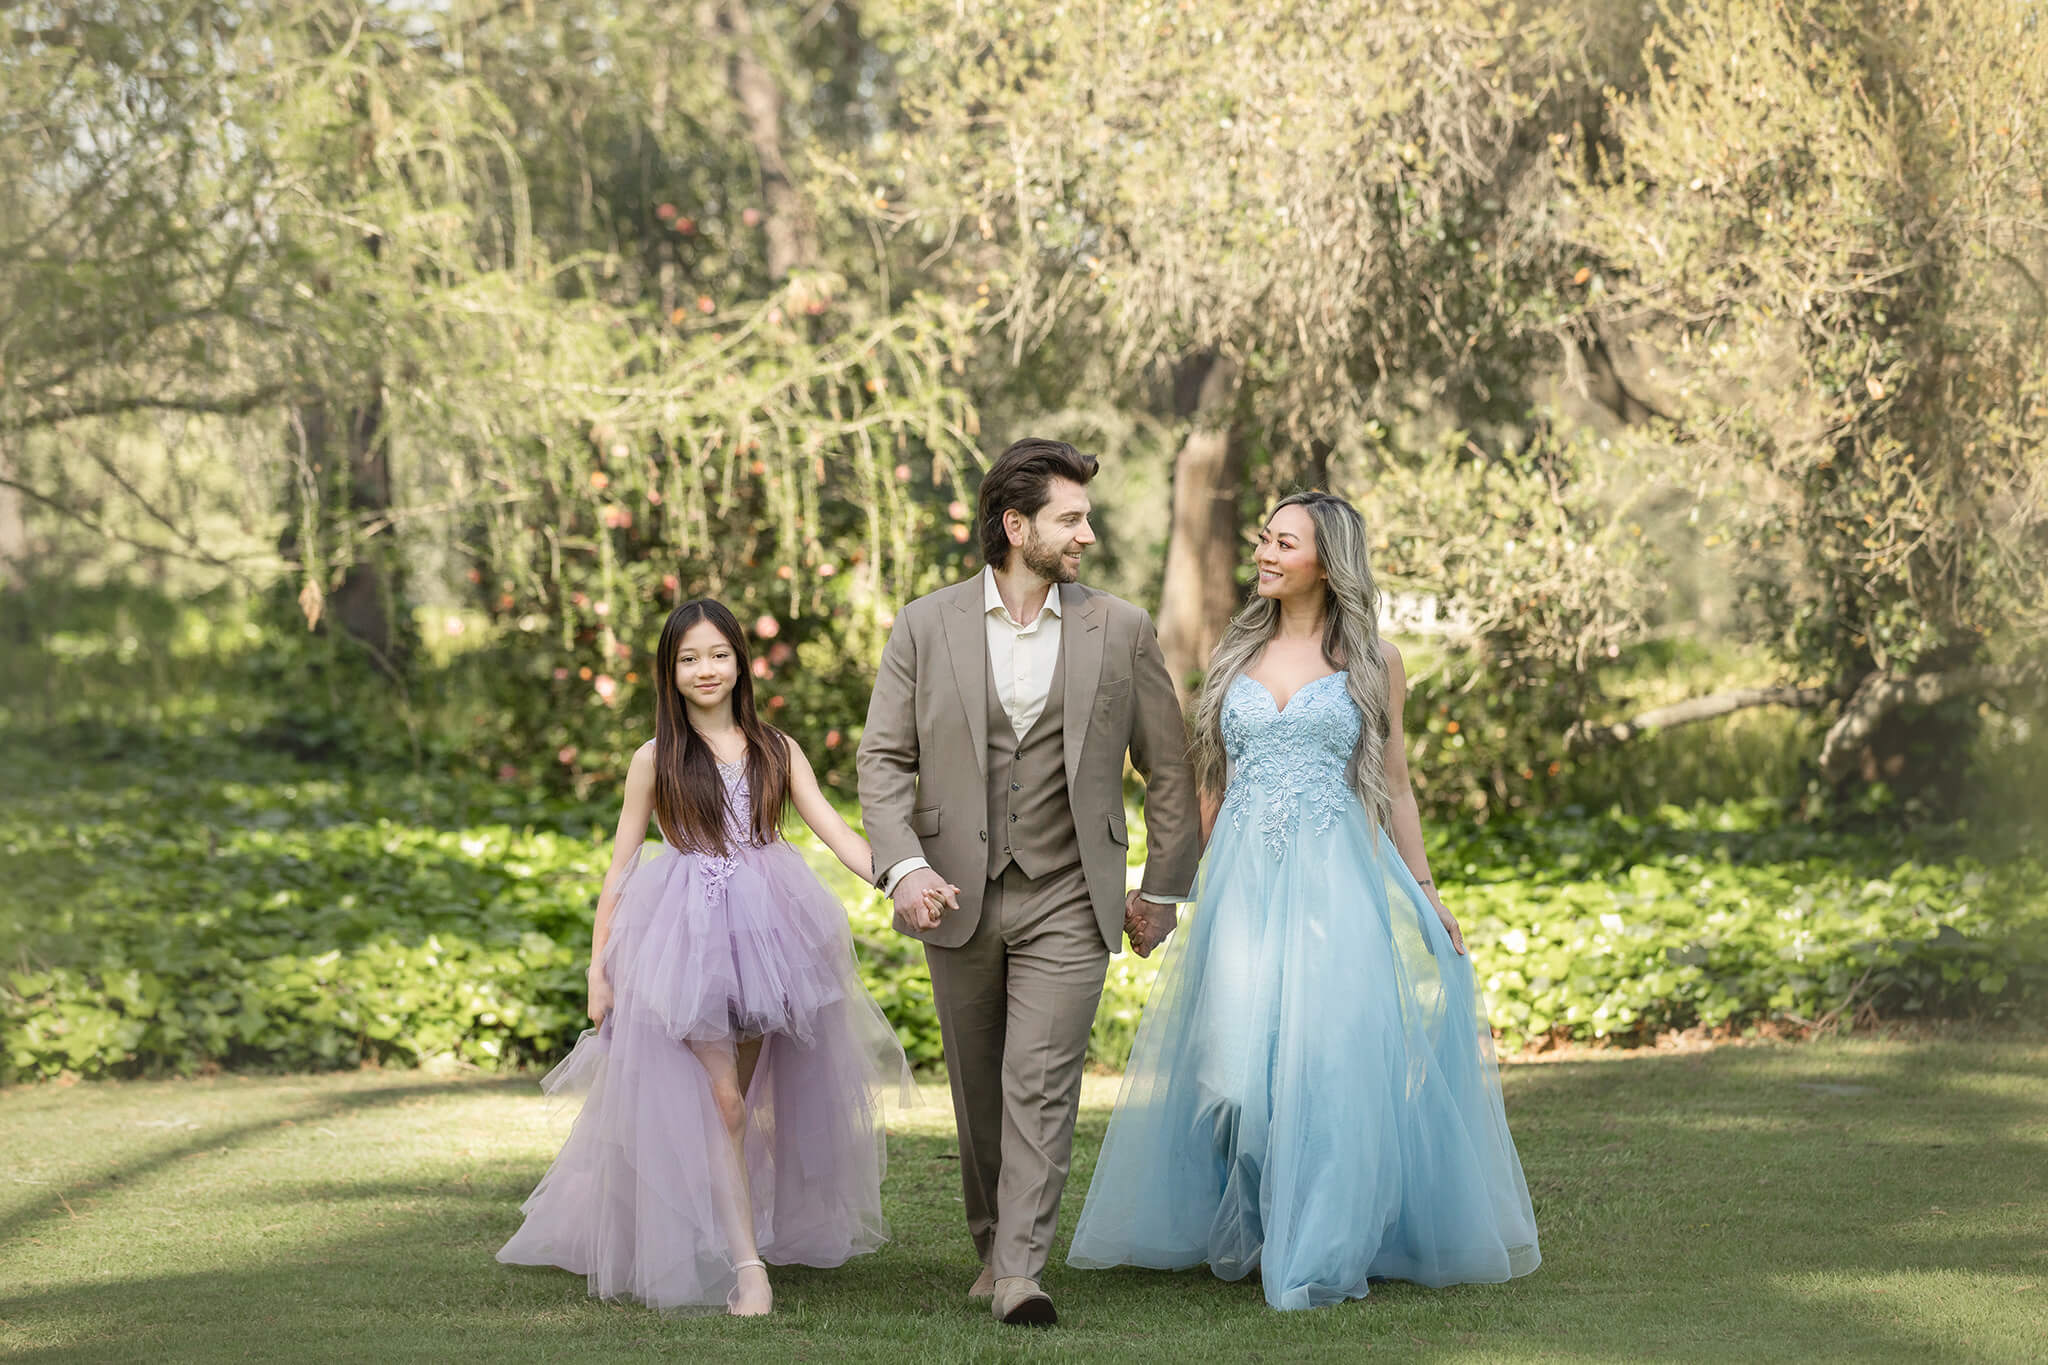 Family photo of mom, dad and daughter at Los Angeles Arboretum. Mom in a blue dress, dad in a suit and daughter in a purple dress walking towards camera.